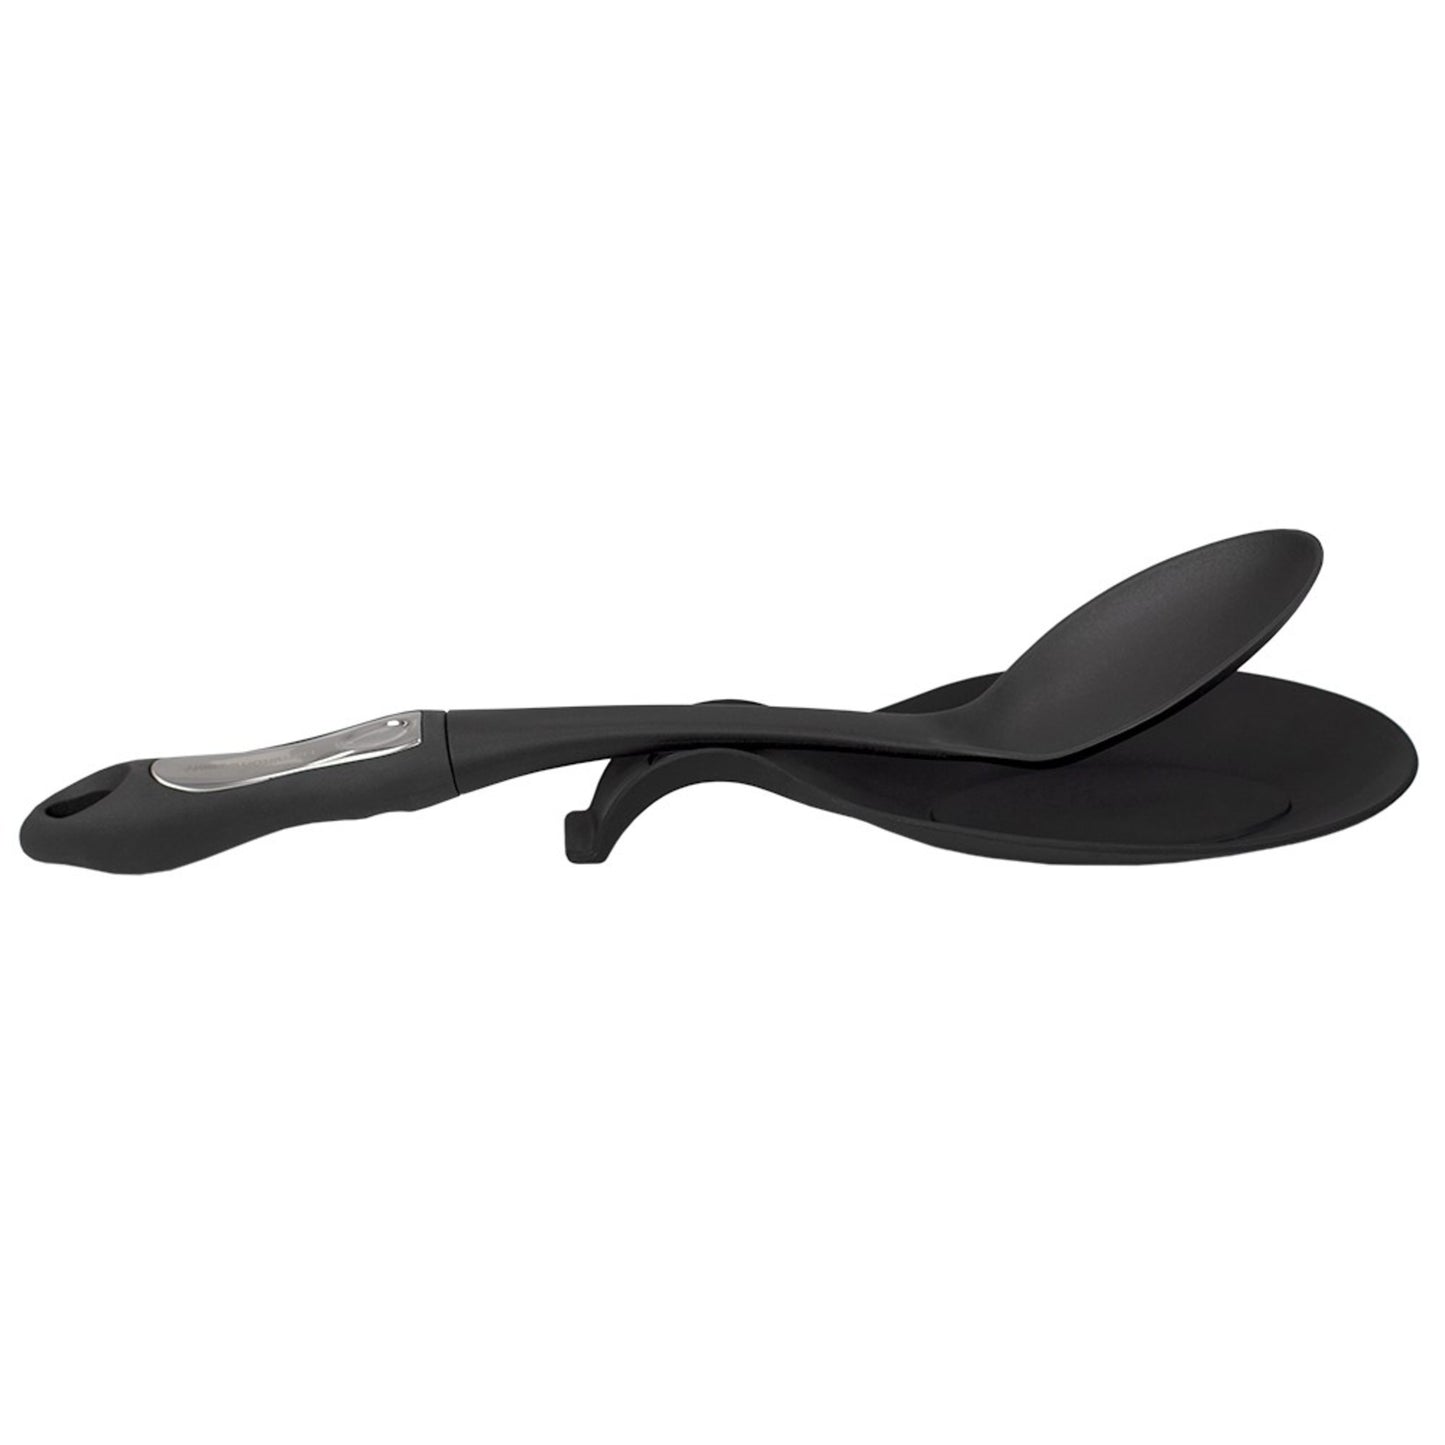 Home Basics Food Grade Flexible Silicone Oversized Almond Shaped Spoon Rest, Black - Black